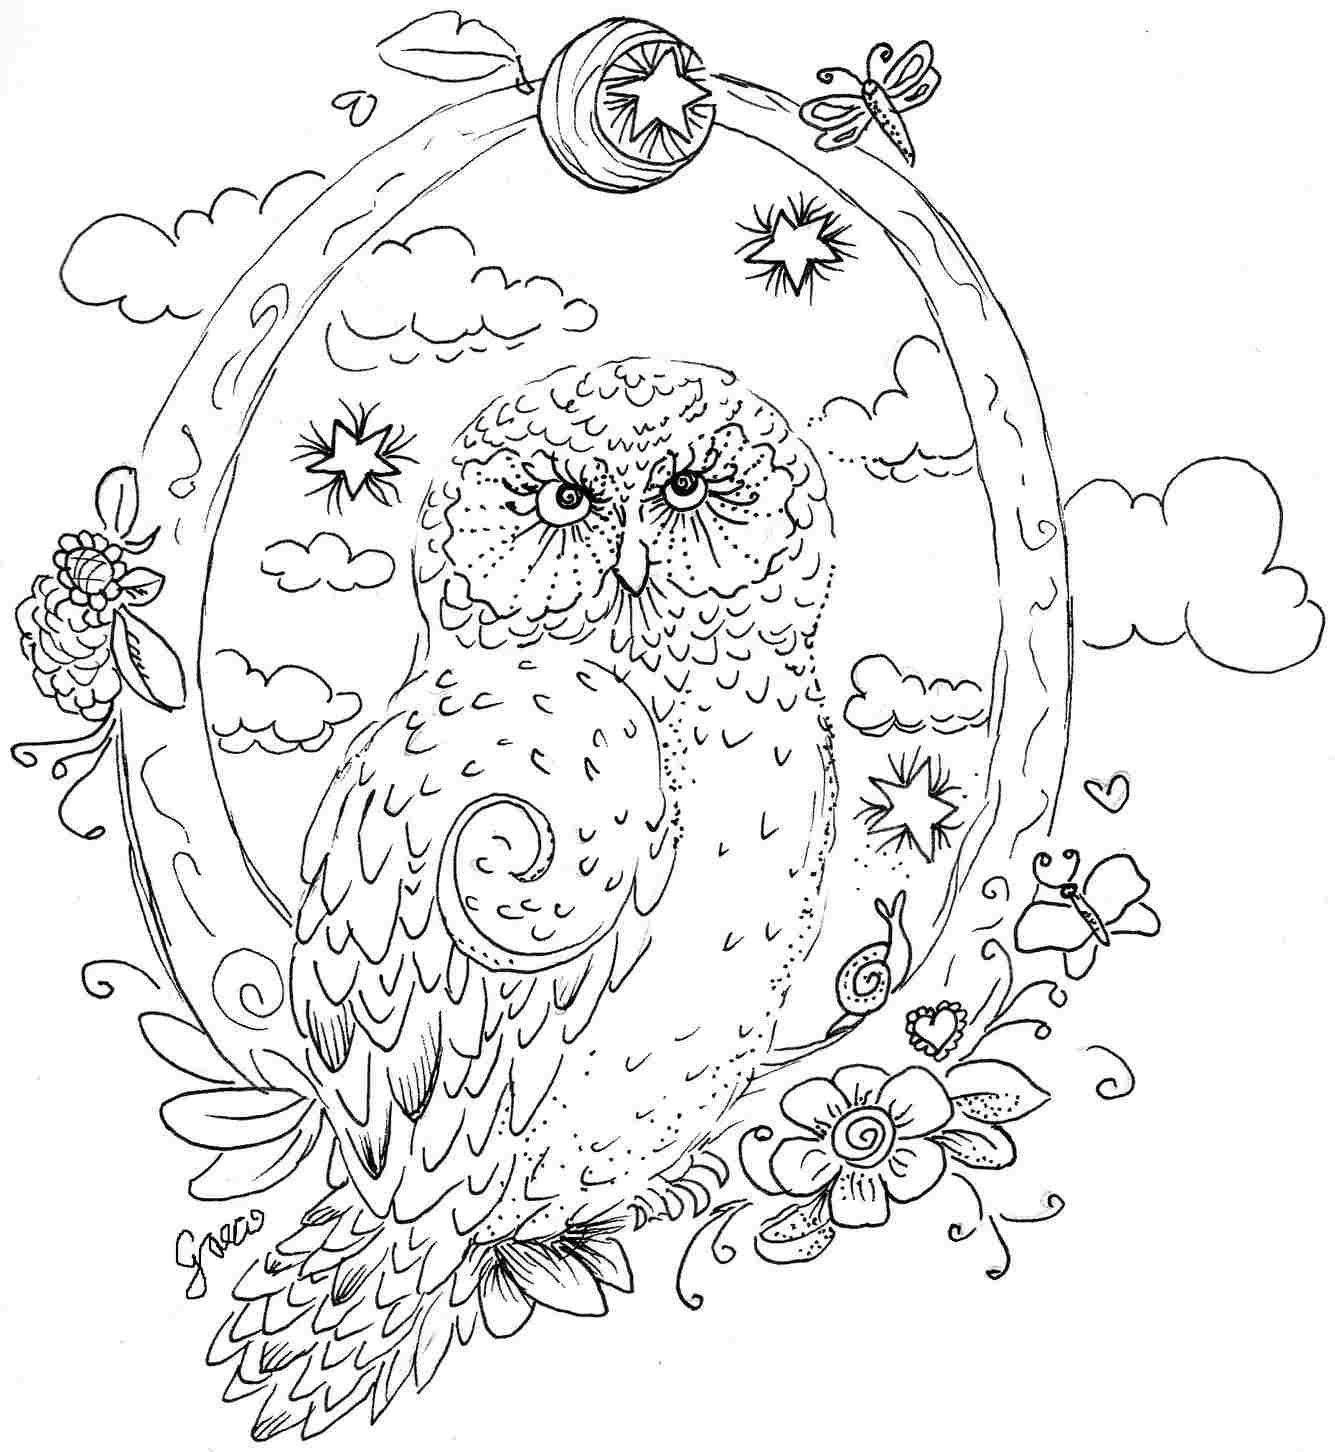 Boys Hard Coloring Pages Animal
 Pics For Coloring Pages For Adults Difficult Owls